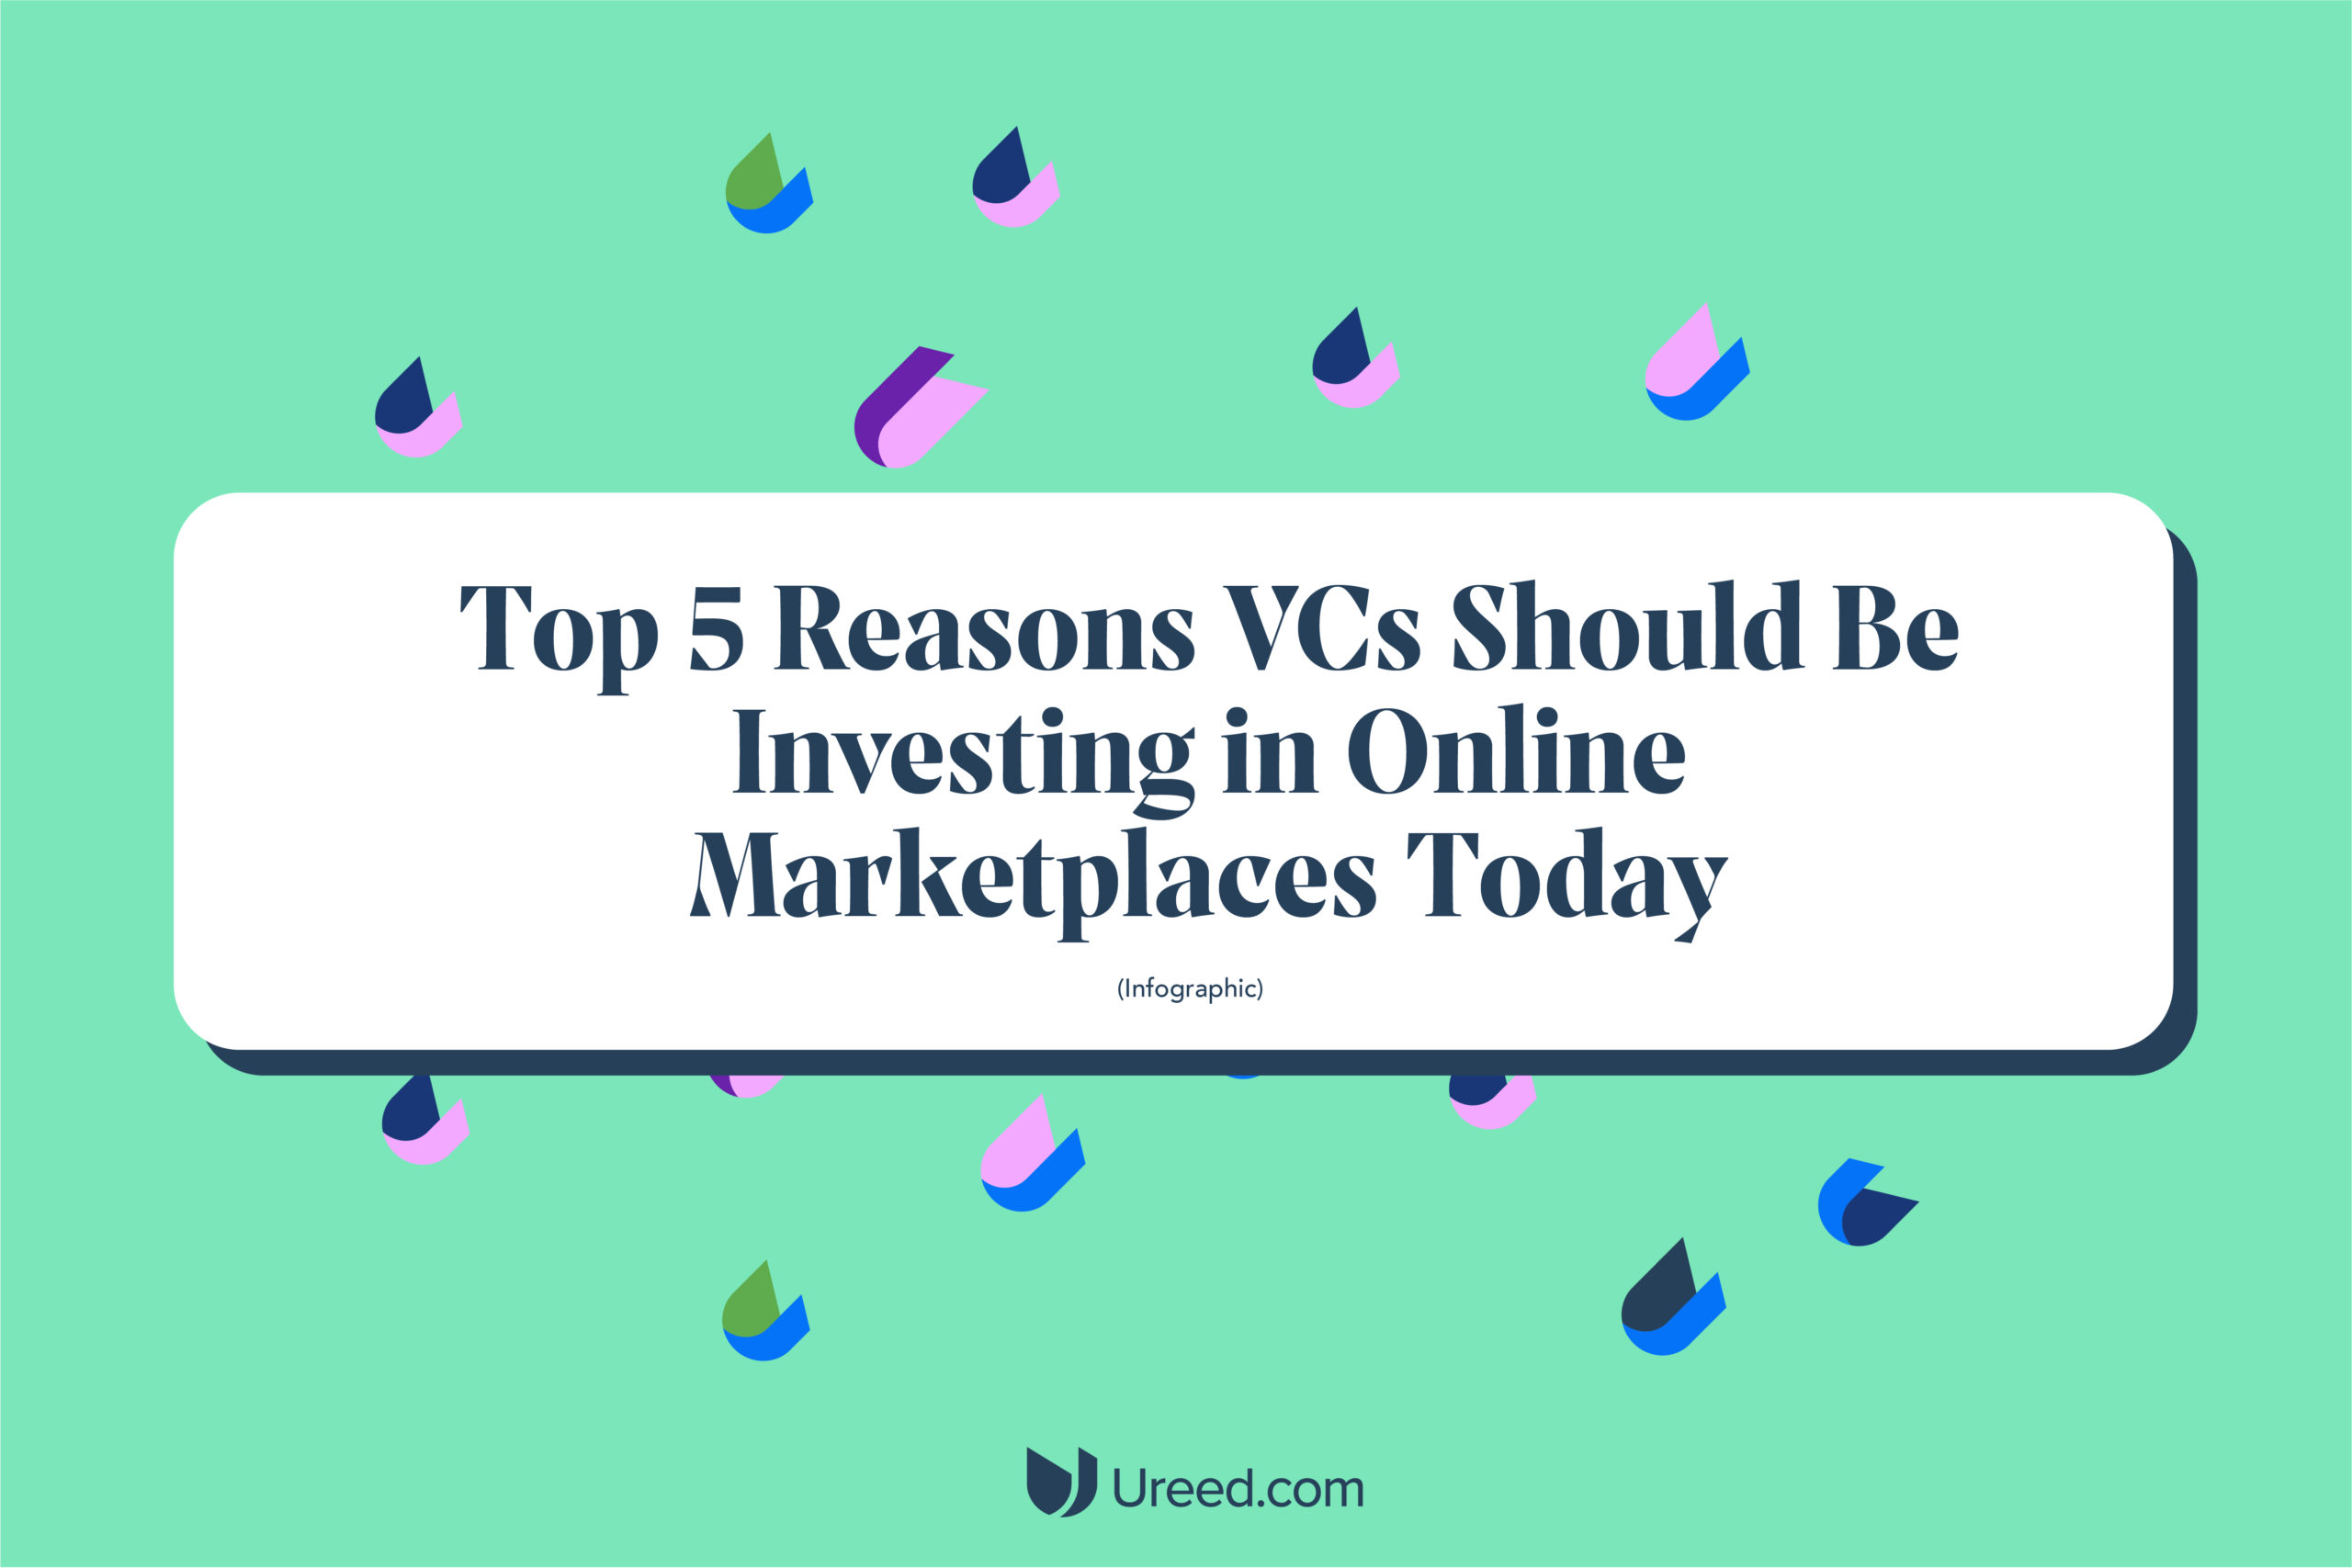 Top 5 Reasons VCs Should Be Investing in Online Marketplaces Today